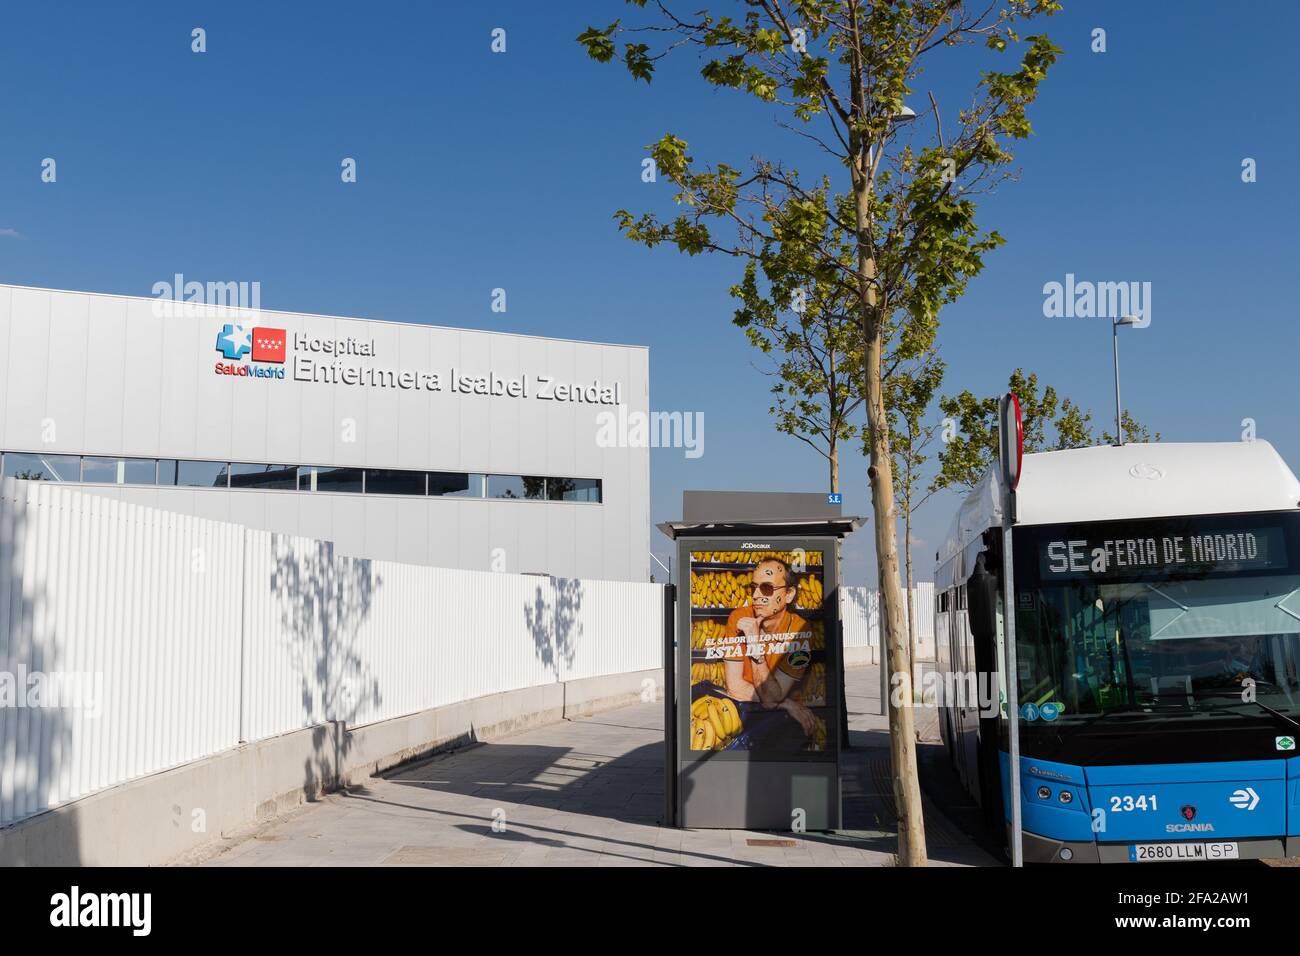 Madrid, Spain; April 17 2021: Facade of the new  Pandemic Hospital (Hospital Enfermera Isabel Zendal) used as a COVID-19 vaccination point Stock Photo